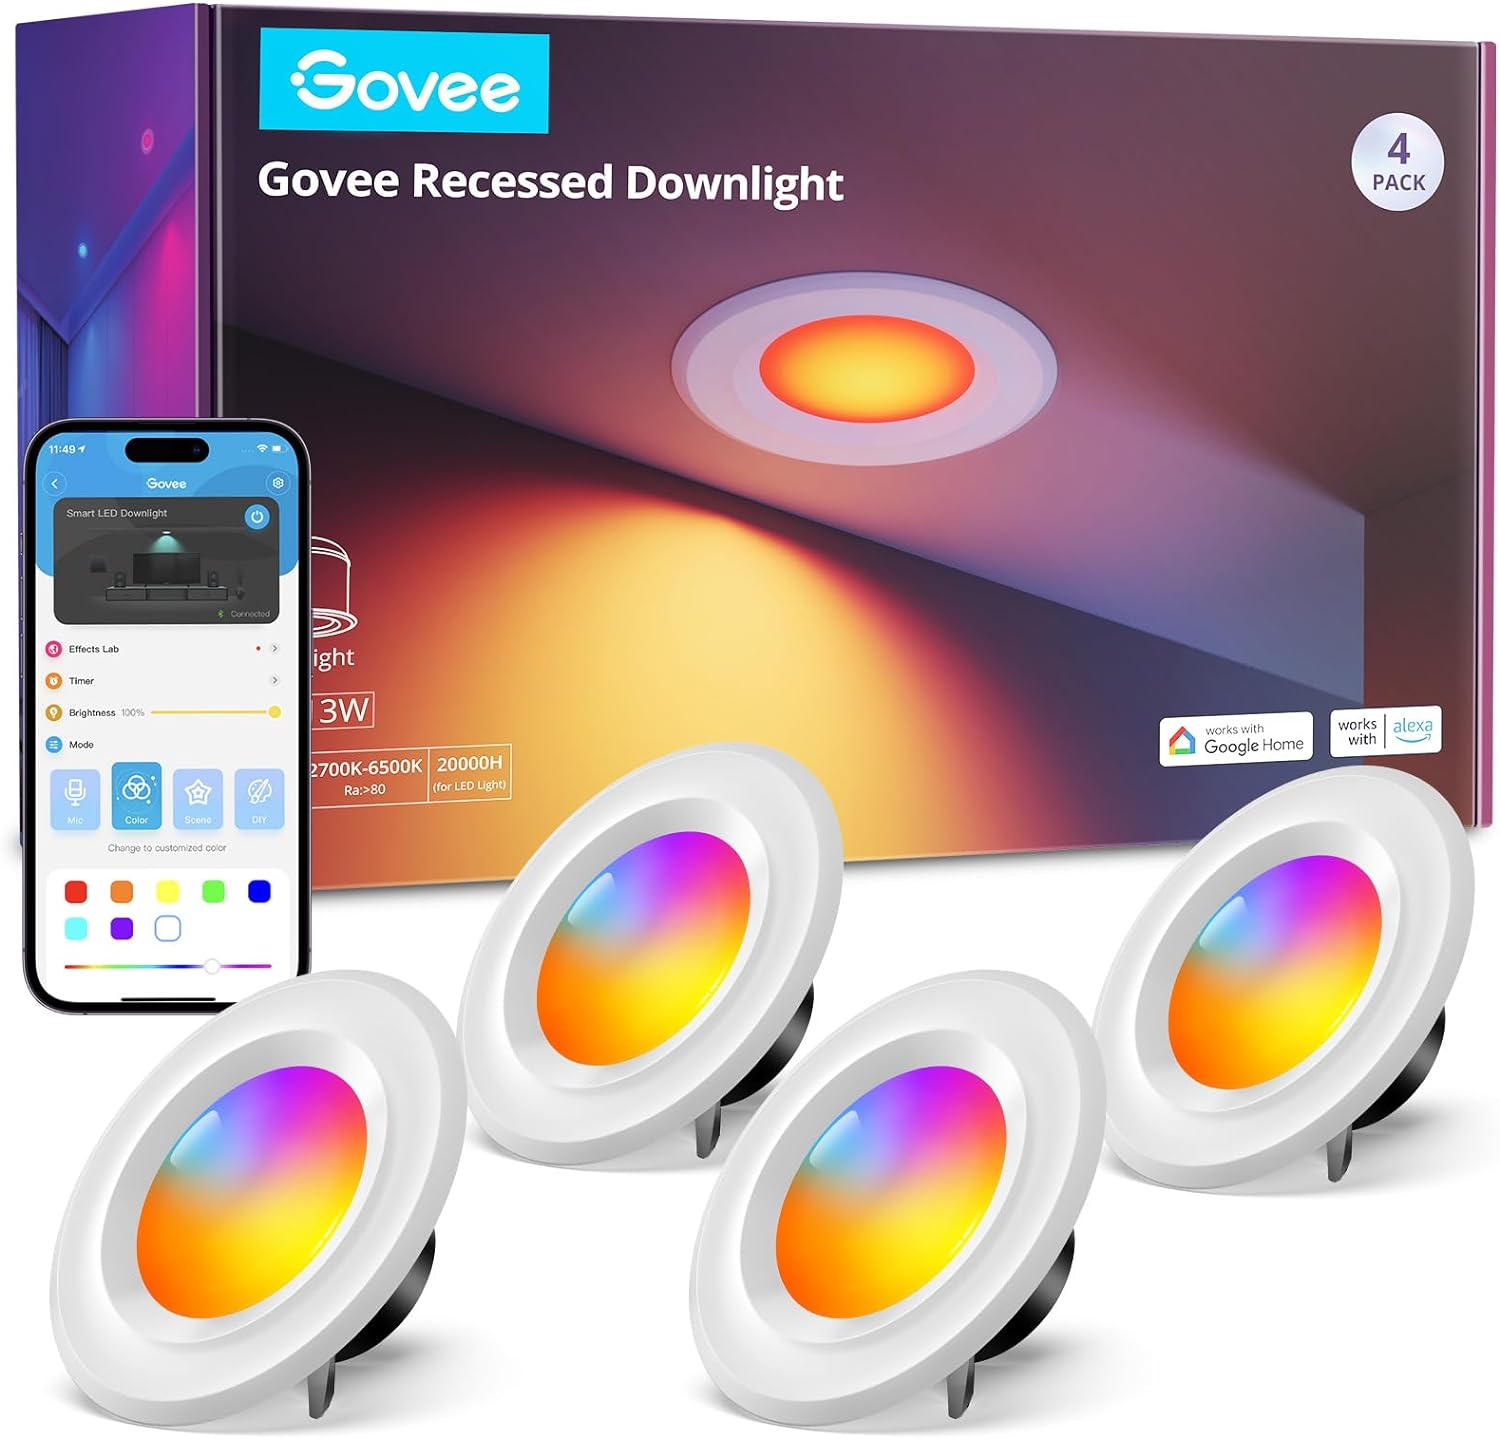 Govee Smart Retrofit Recessed Lighting 6 Inch, Wi-Fi Bluetooth Direct Connect RGBWW Retrofit Can Lights, 65 Scene Modes, Works with Alexa & Google Assistant, 1000 Lumens, 4 Pack